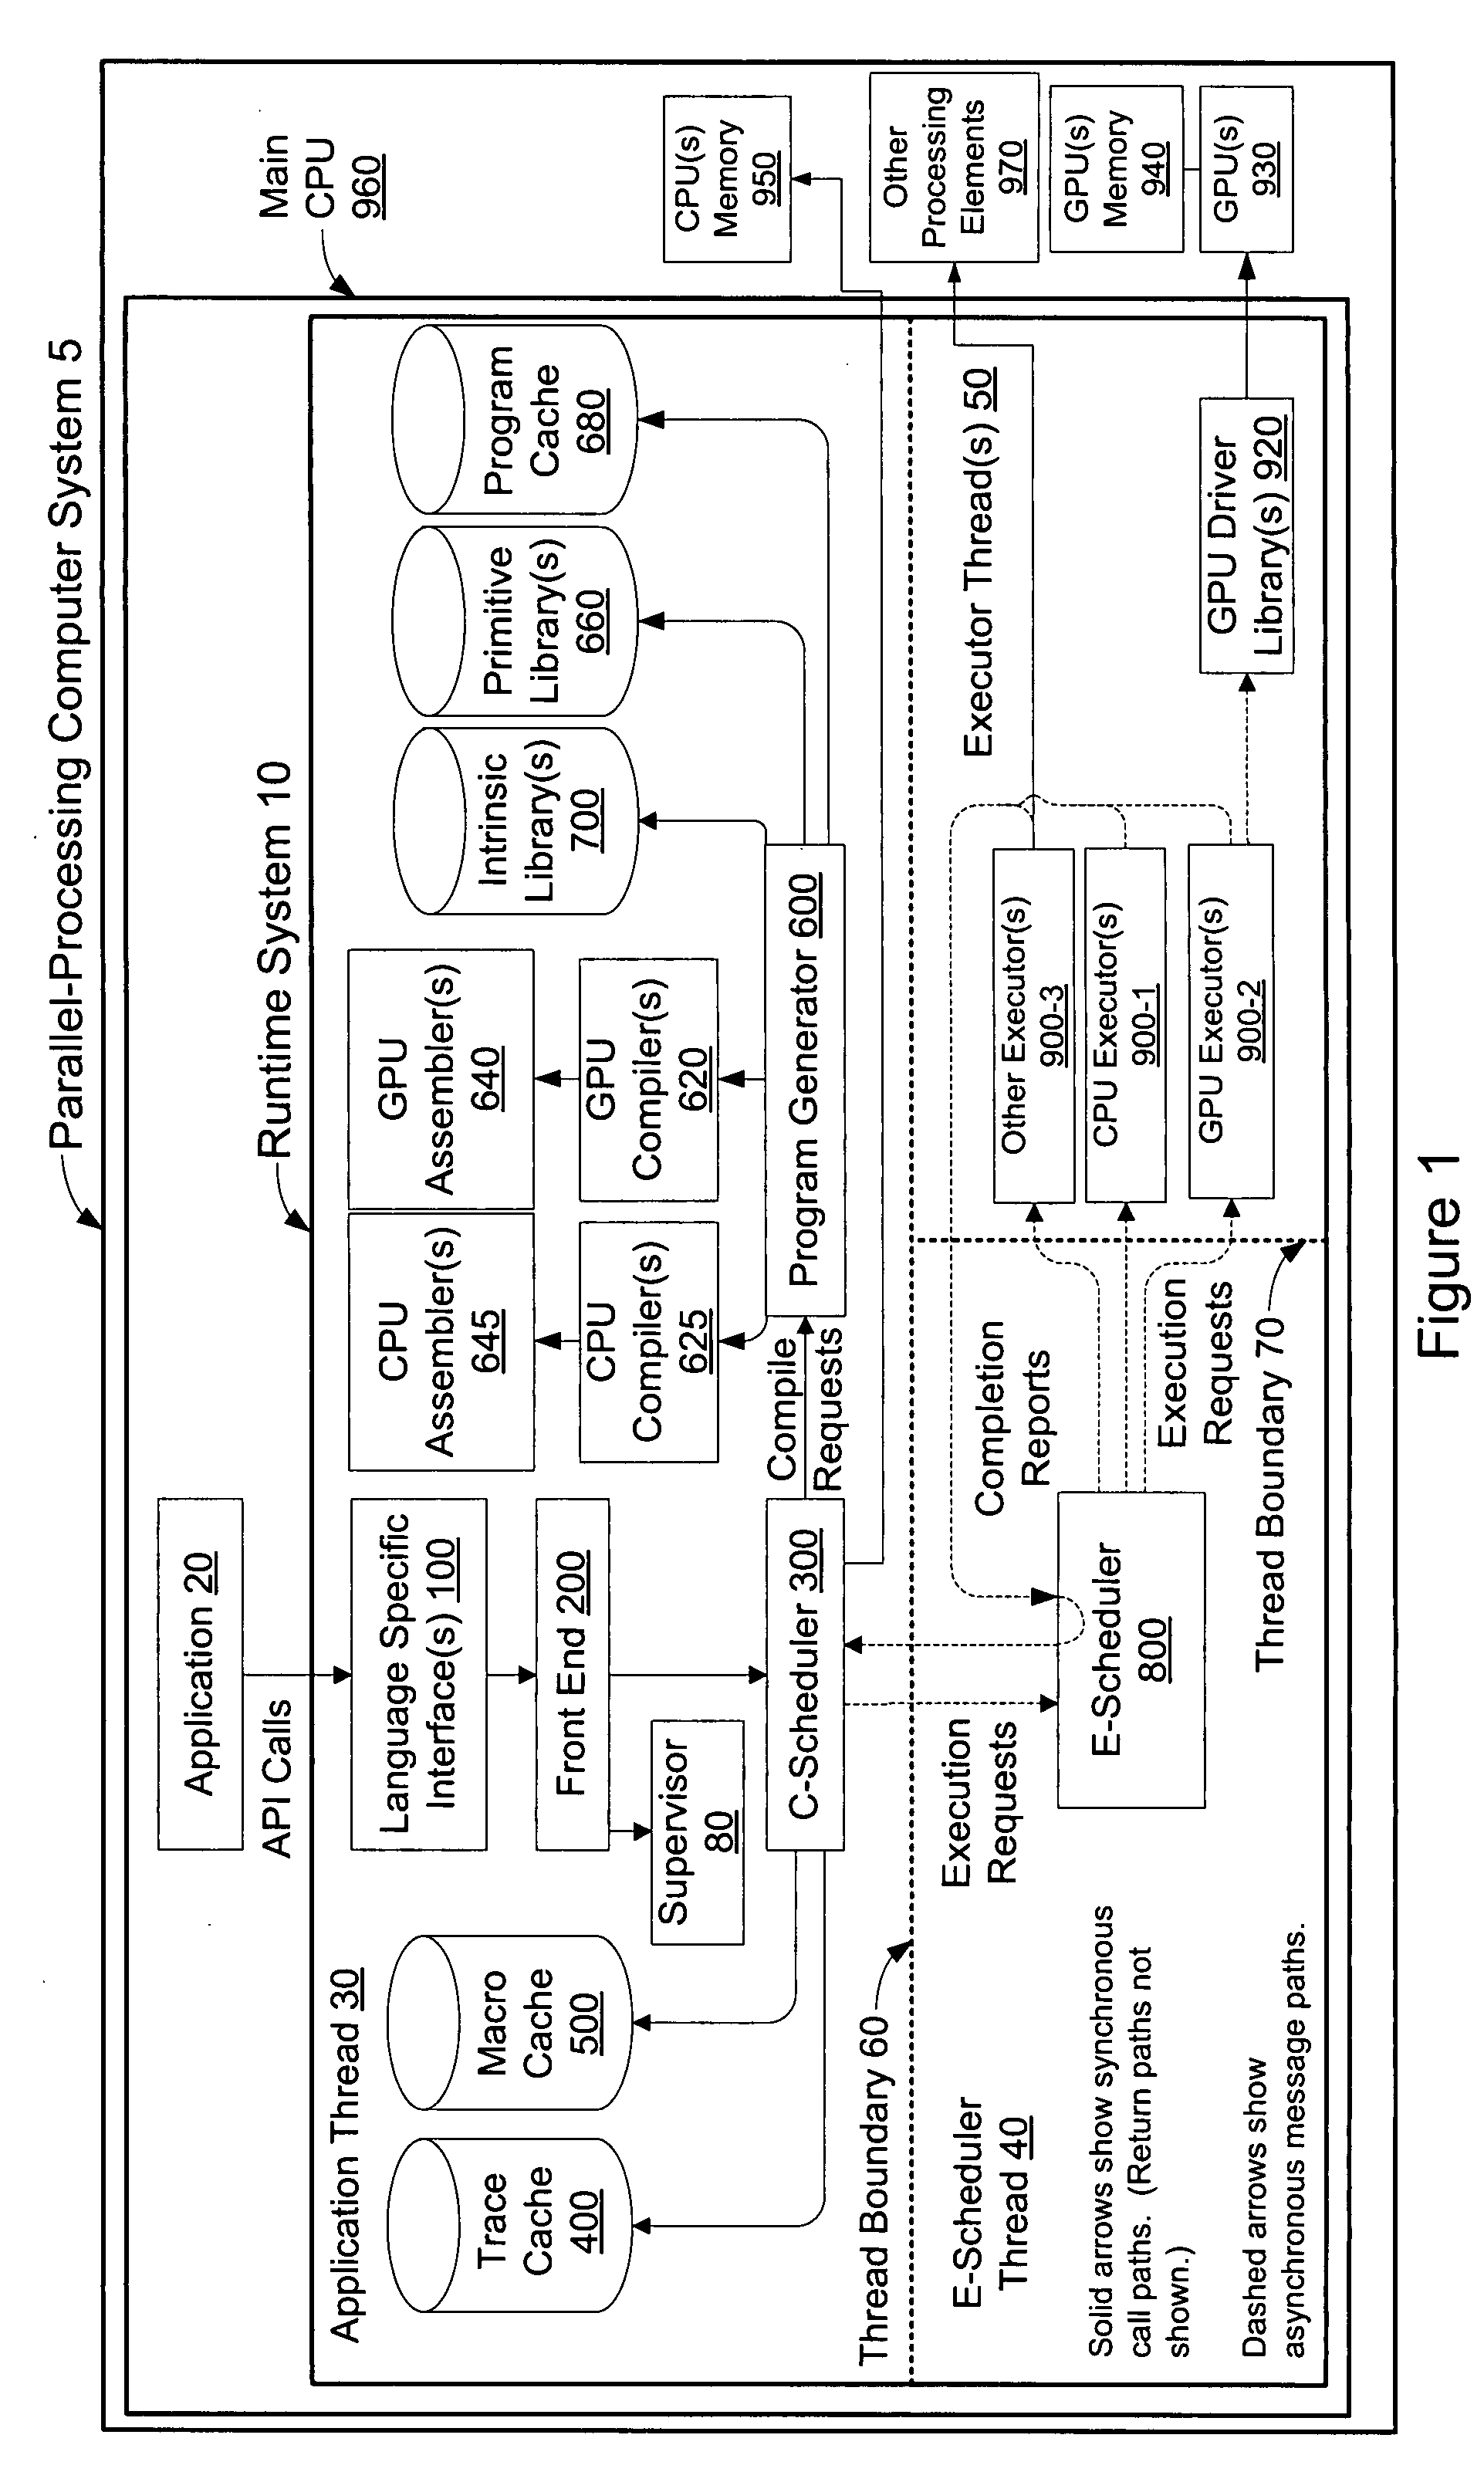 Systems and methods for profiling an application running on a parallel-processing computer system